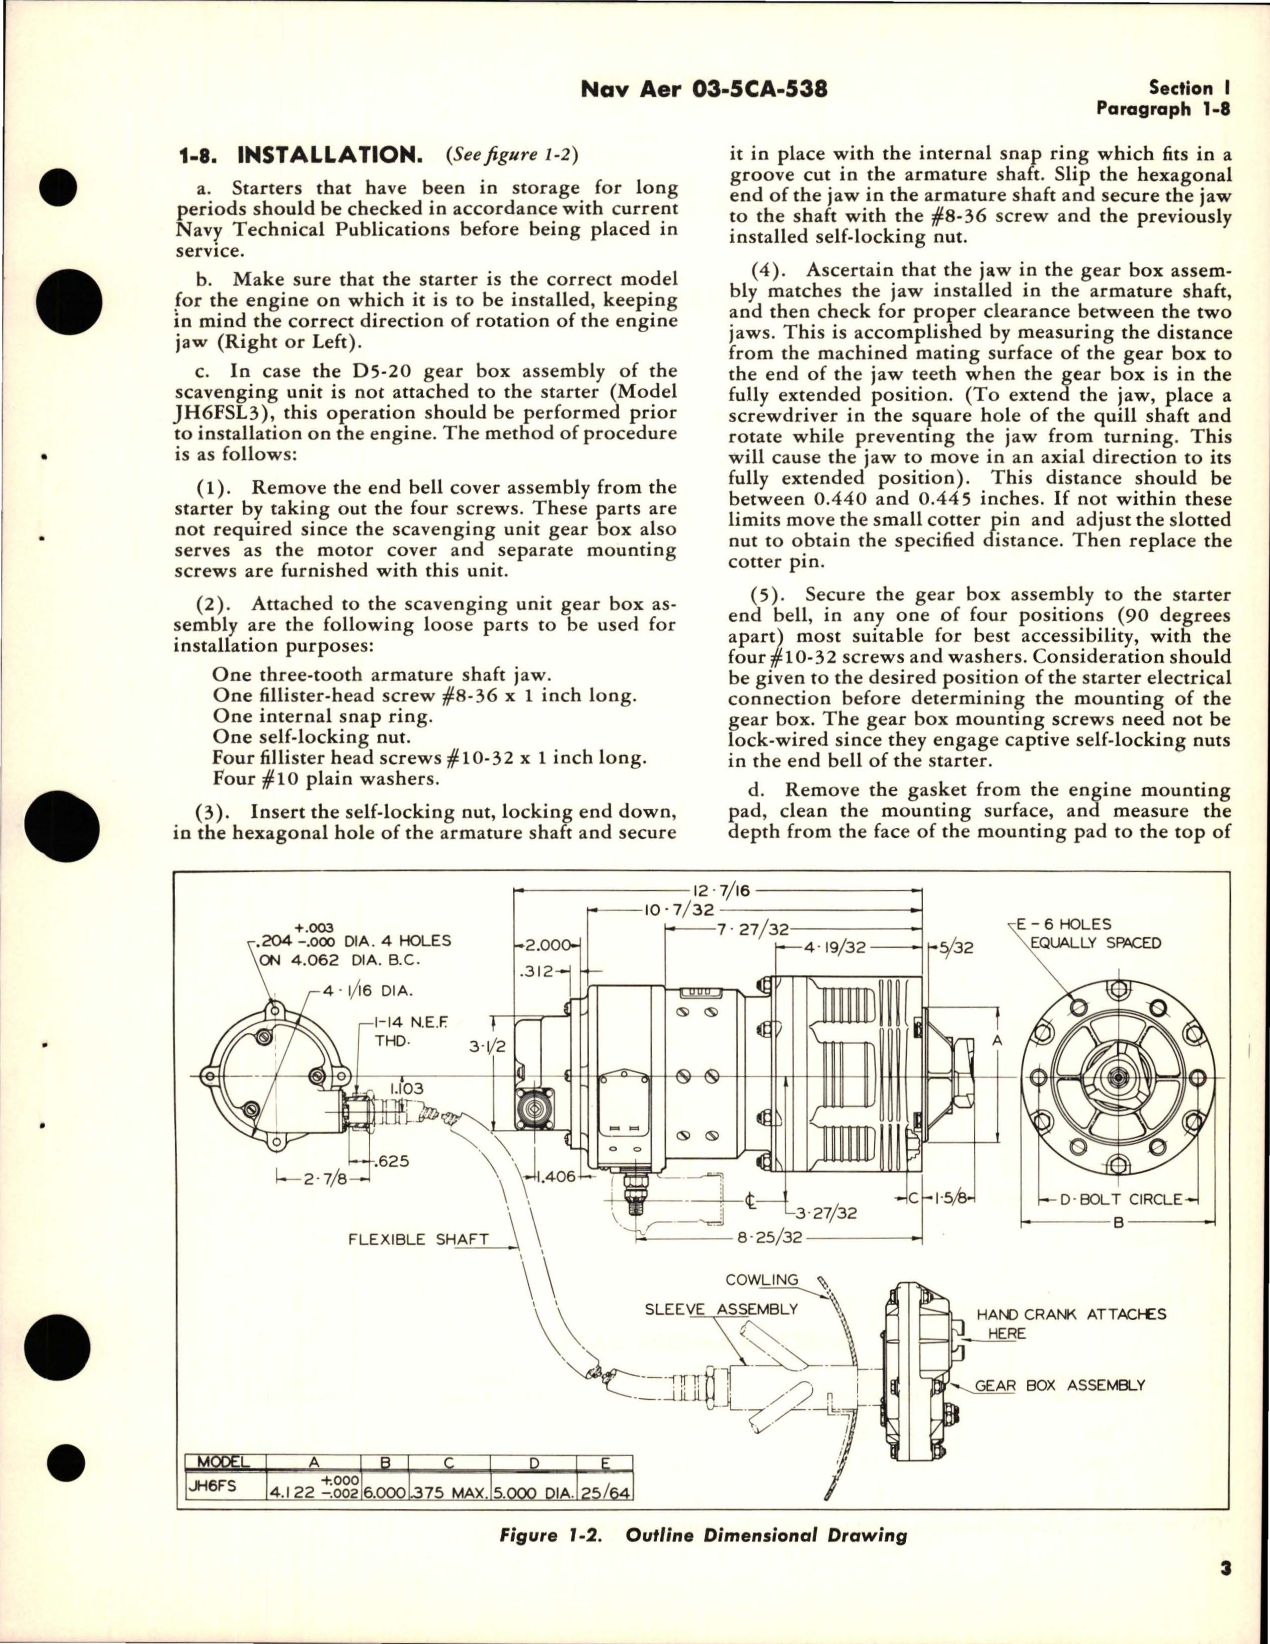 Sample page 7 from AirCorps Library document: Operation, Service, and Overhaul Instructions with Parts Catalog for Starters with Scavenging Unit - Models JH6FSL3, D-5